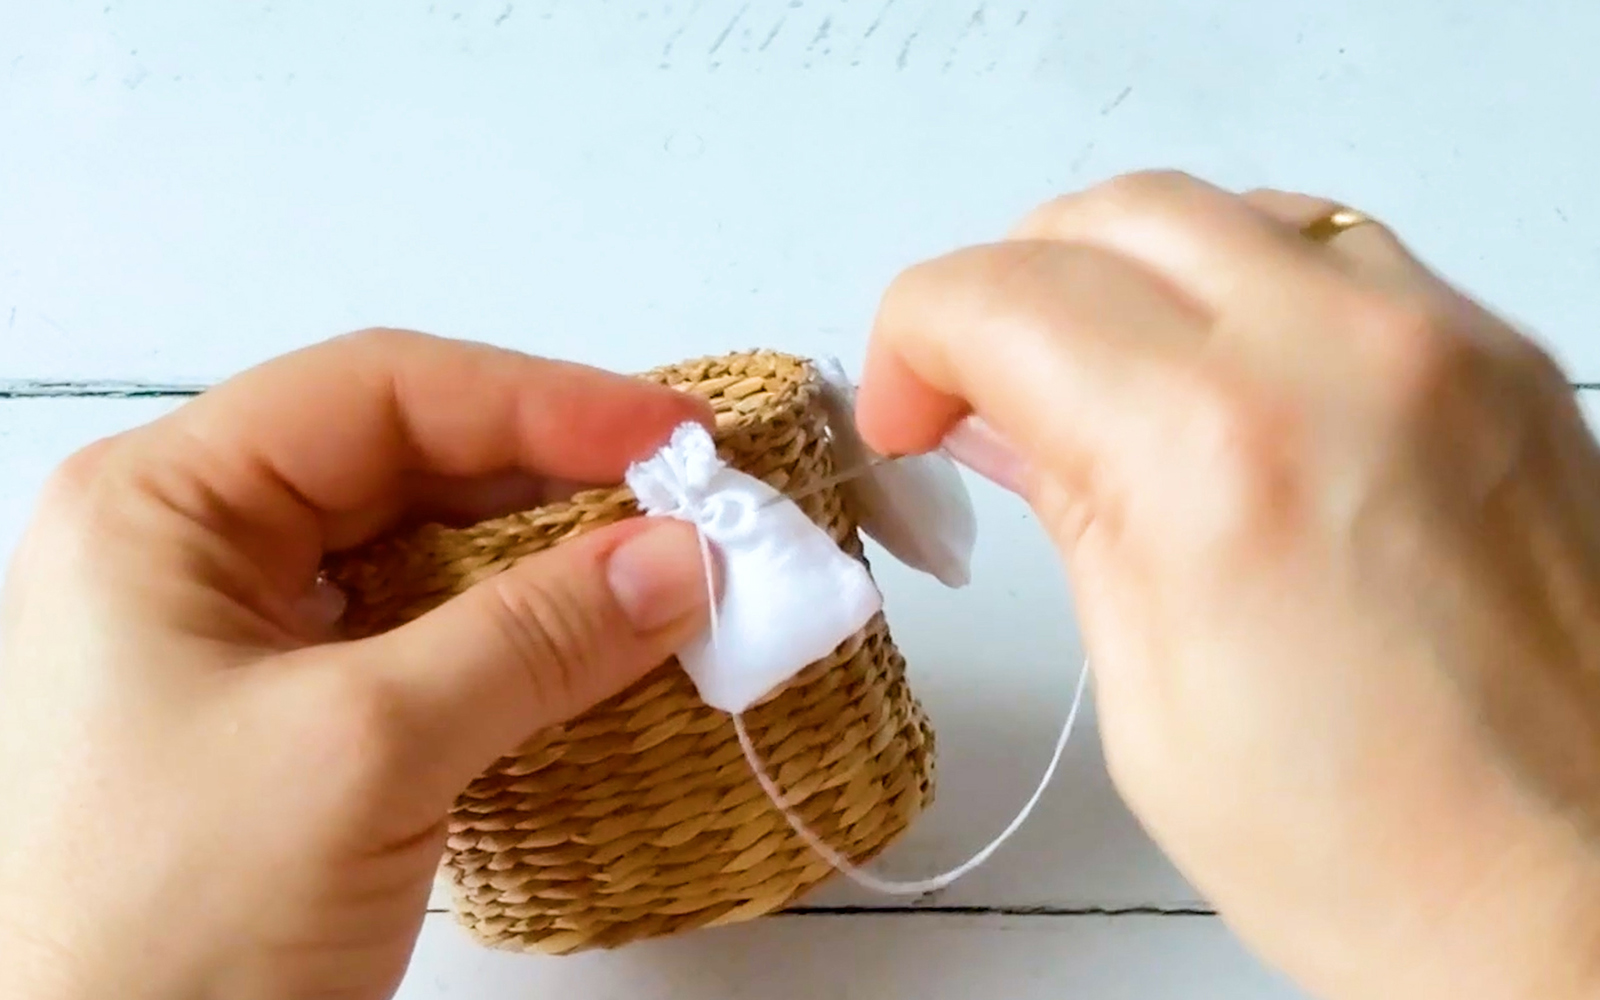 Hands sewing a small white bag to a basket